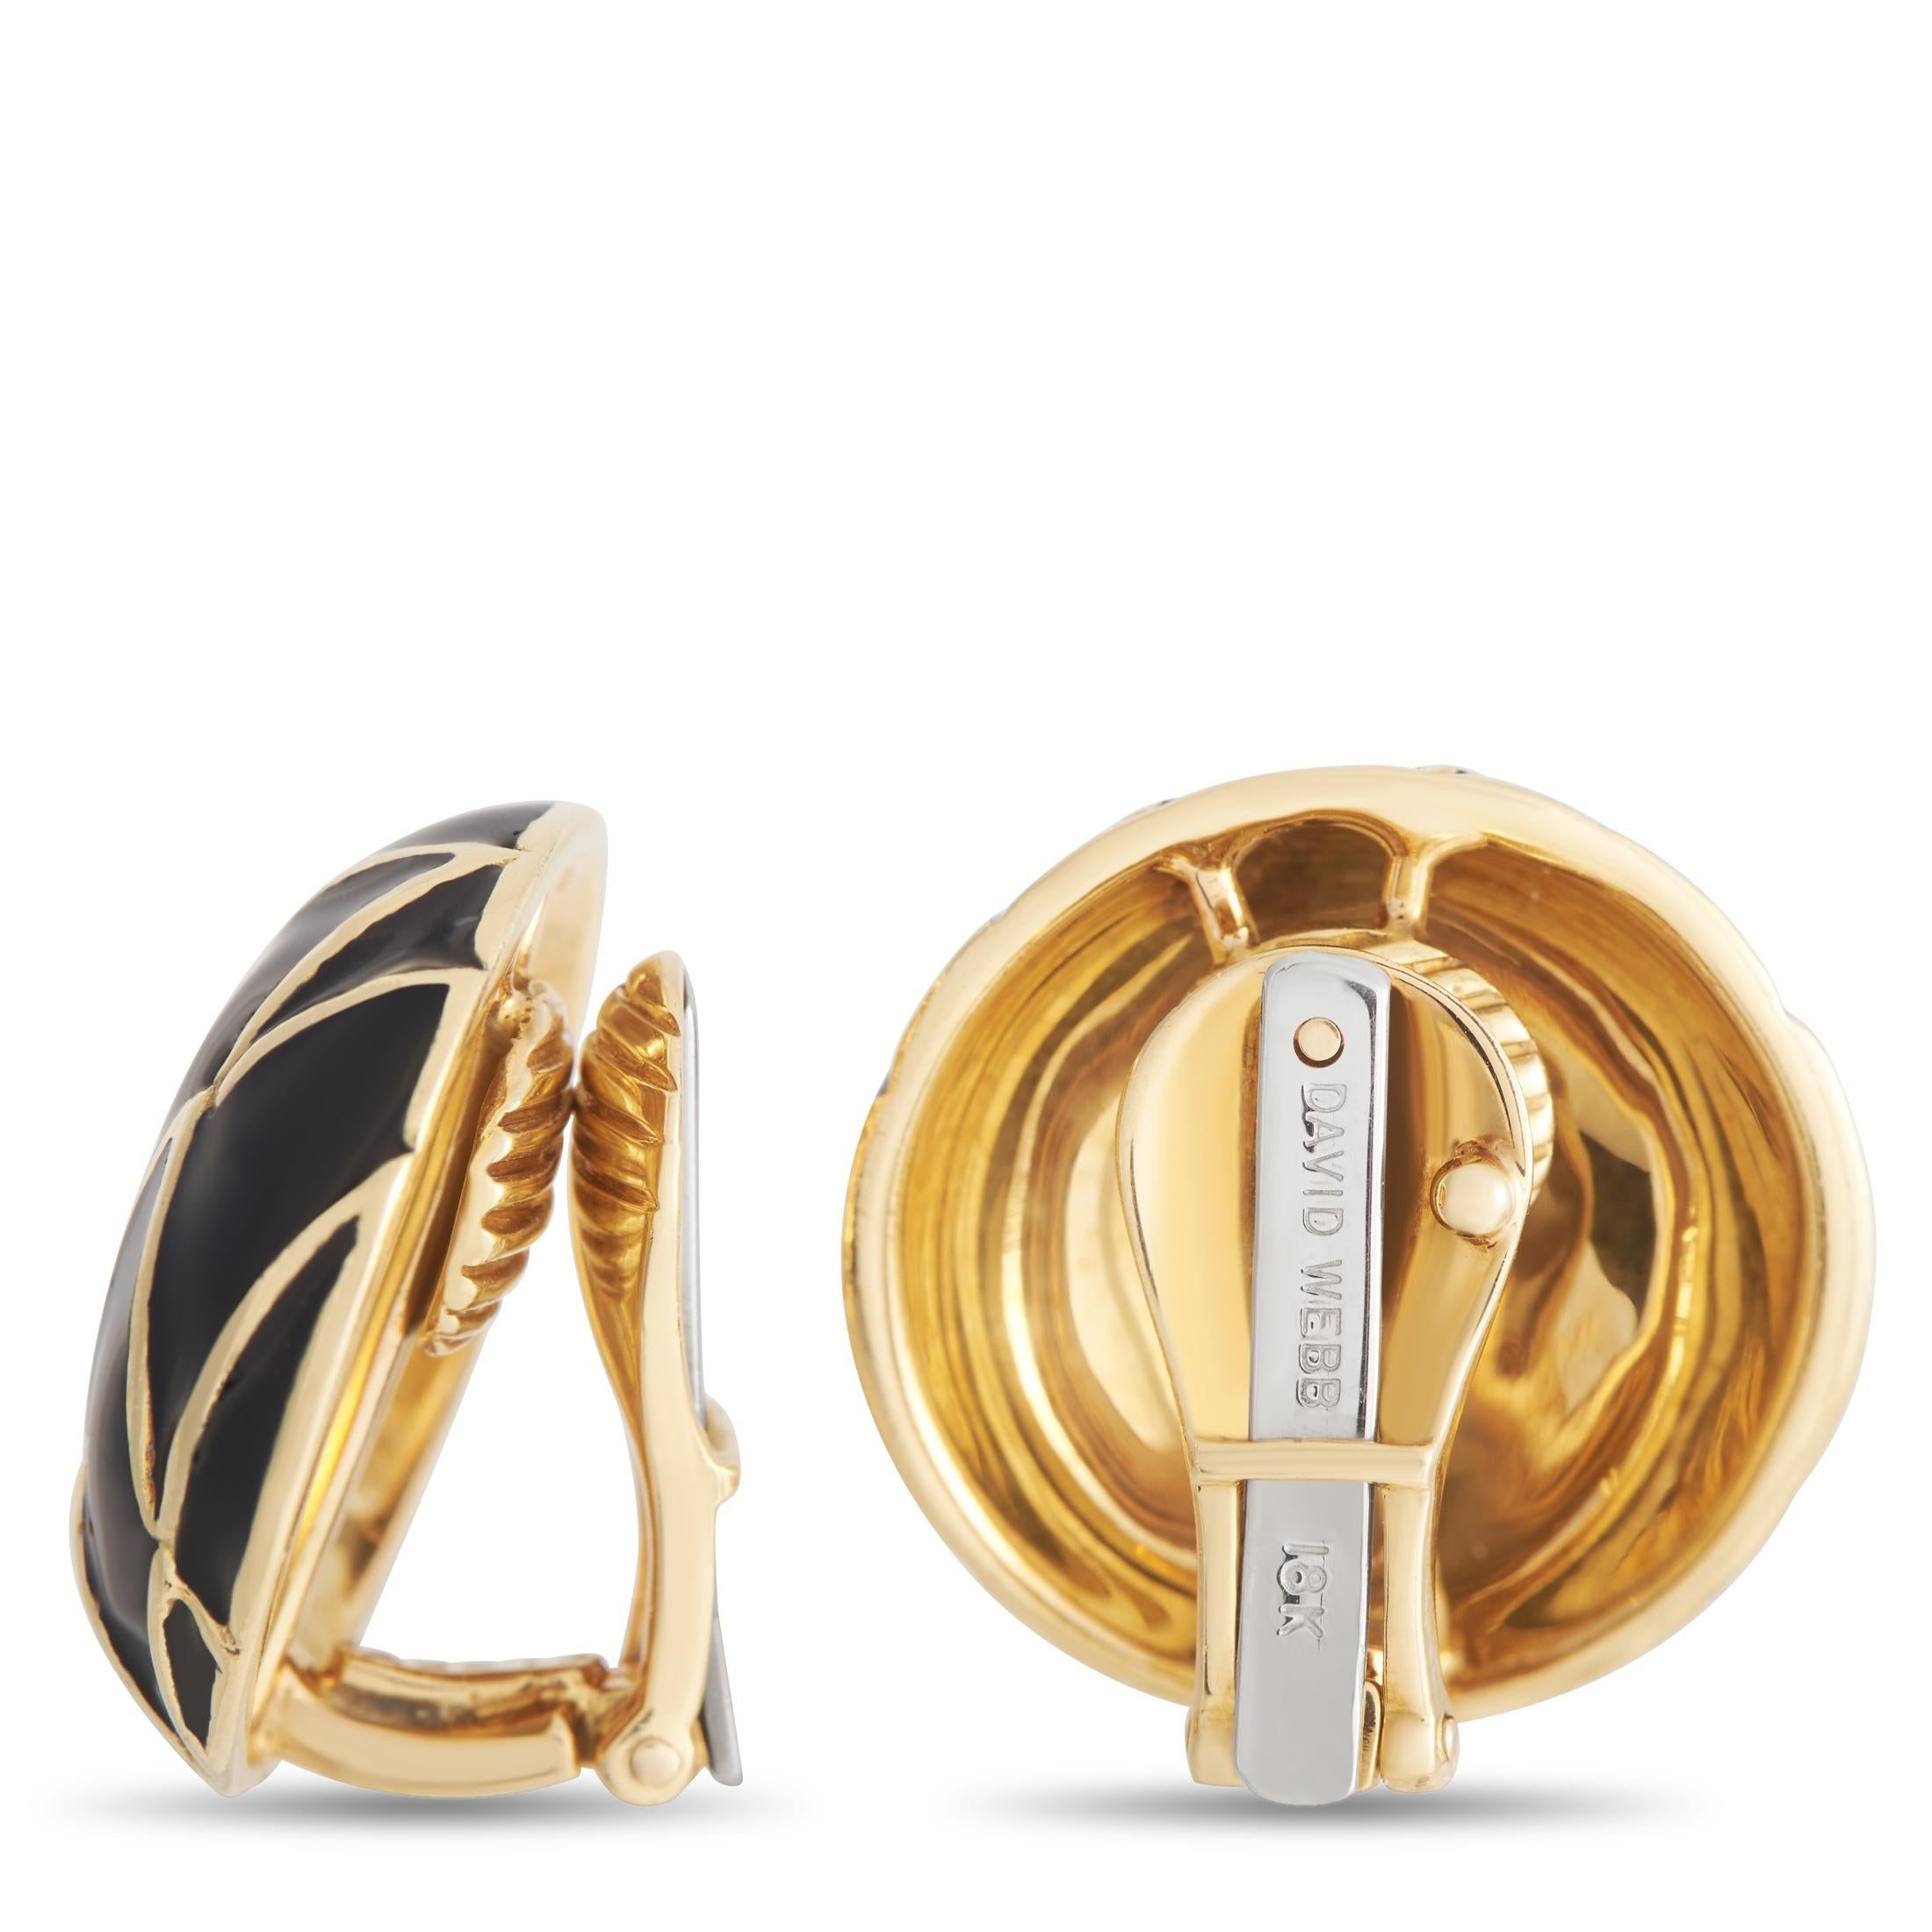 Sleek black enamel and opulent 18K Yellow Gold in a lattice pattern create a beautiful contrast on these exceptional David Webb earrings. These chic, minimalist earrings are incredibly versatile and each measure 0.80” round. 